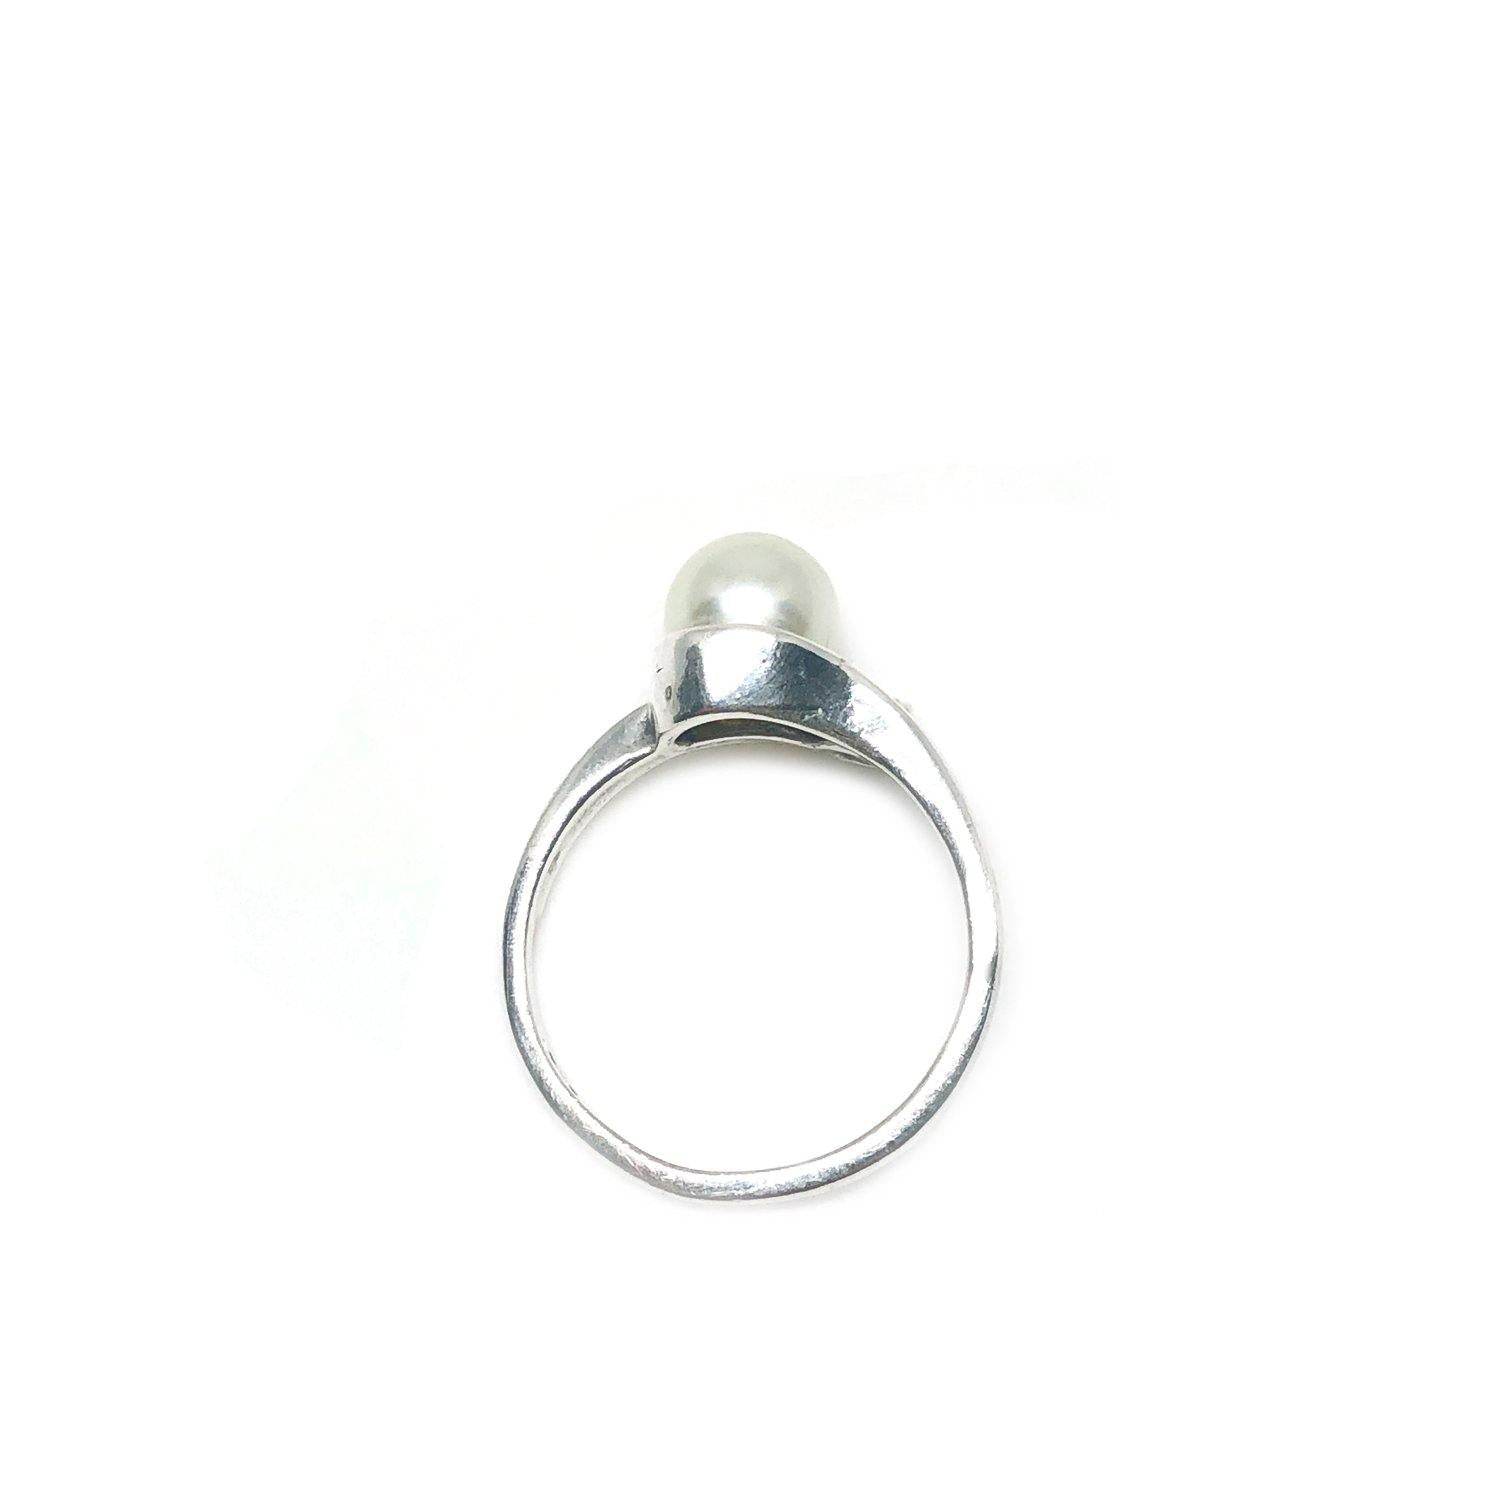 Swirl Japanese Saltwater Akoya Cultured Pearl Ring- Sterling Silver Sz 7 Side